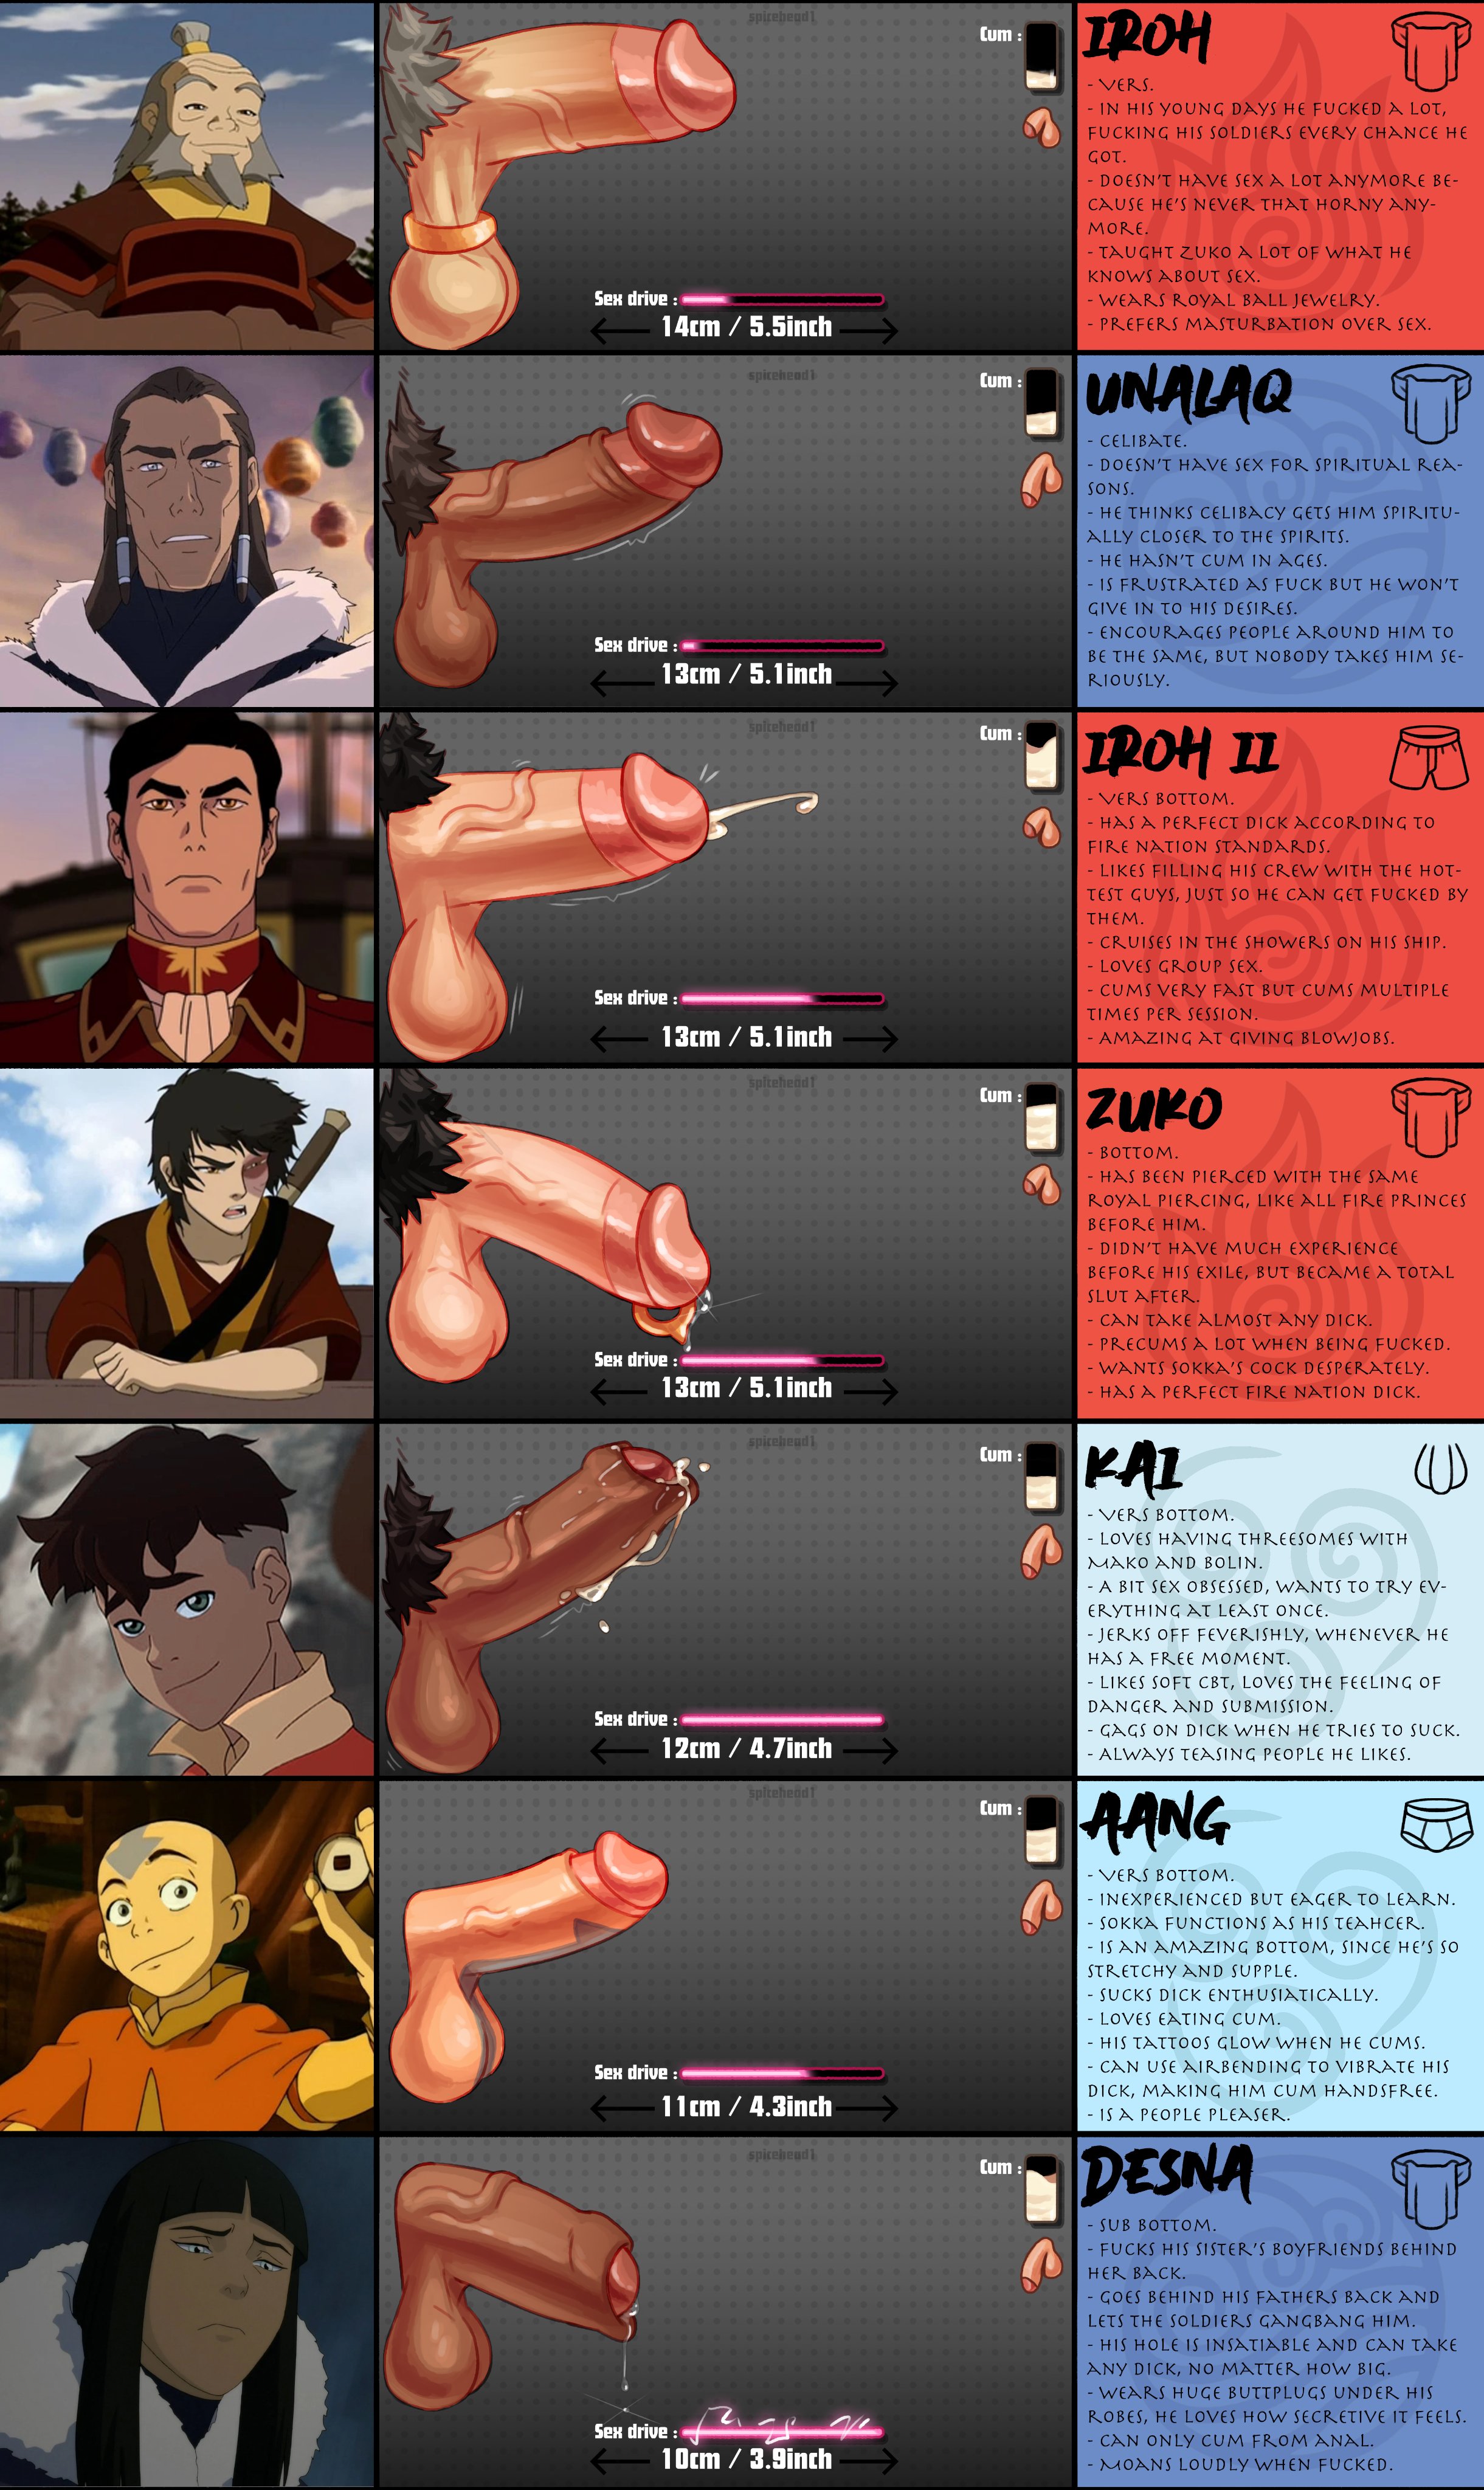 Post 5836651 Aang Avatar The Last Airbender Desna Iroh Kai Spicehead